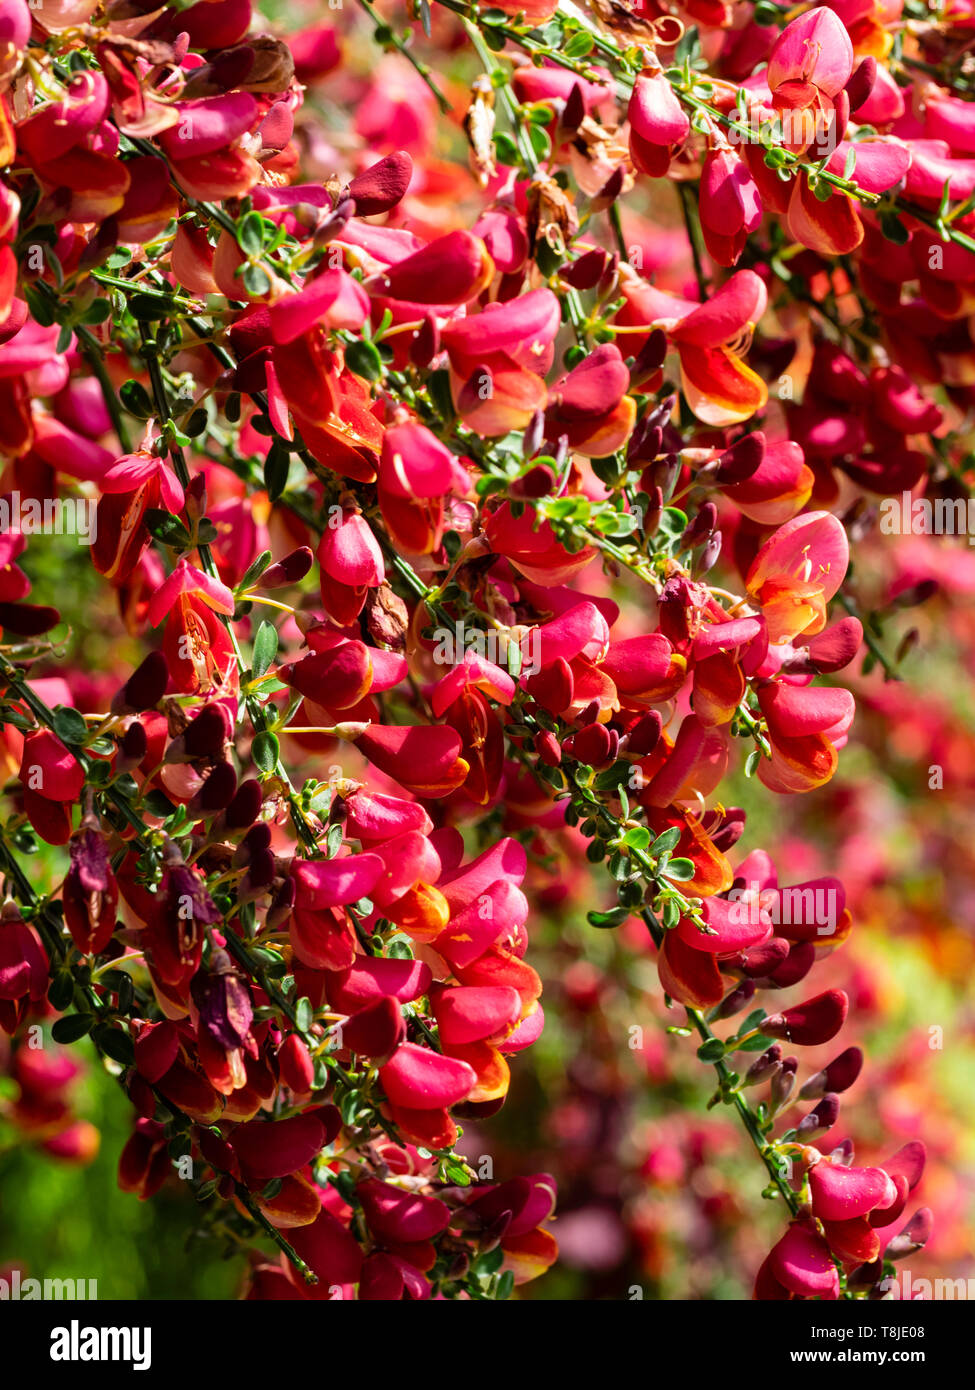 Gold rimmed red flowers of the spring flowering scotch broom, Cytisus scoparius 'Burkwoodii' Stock Photo